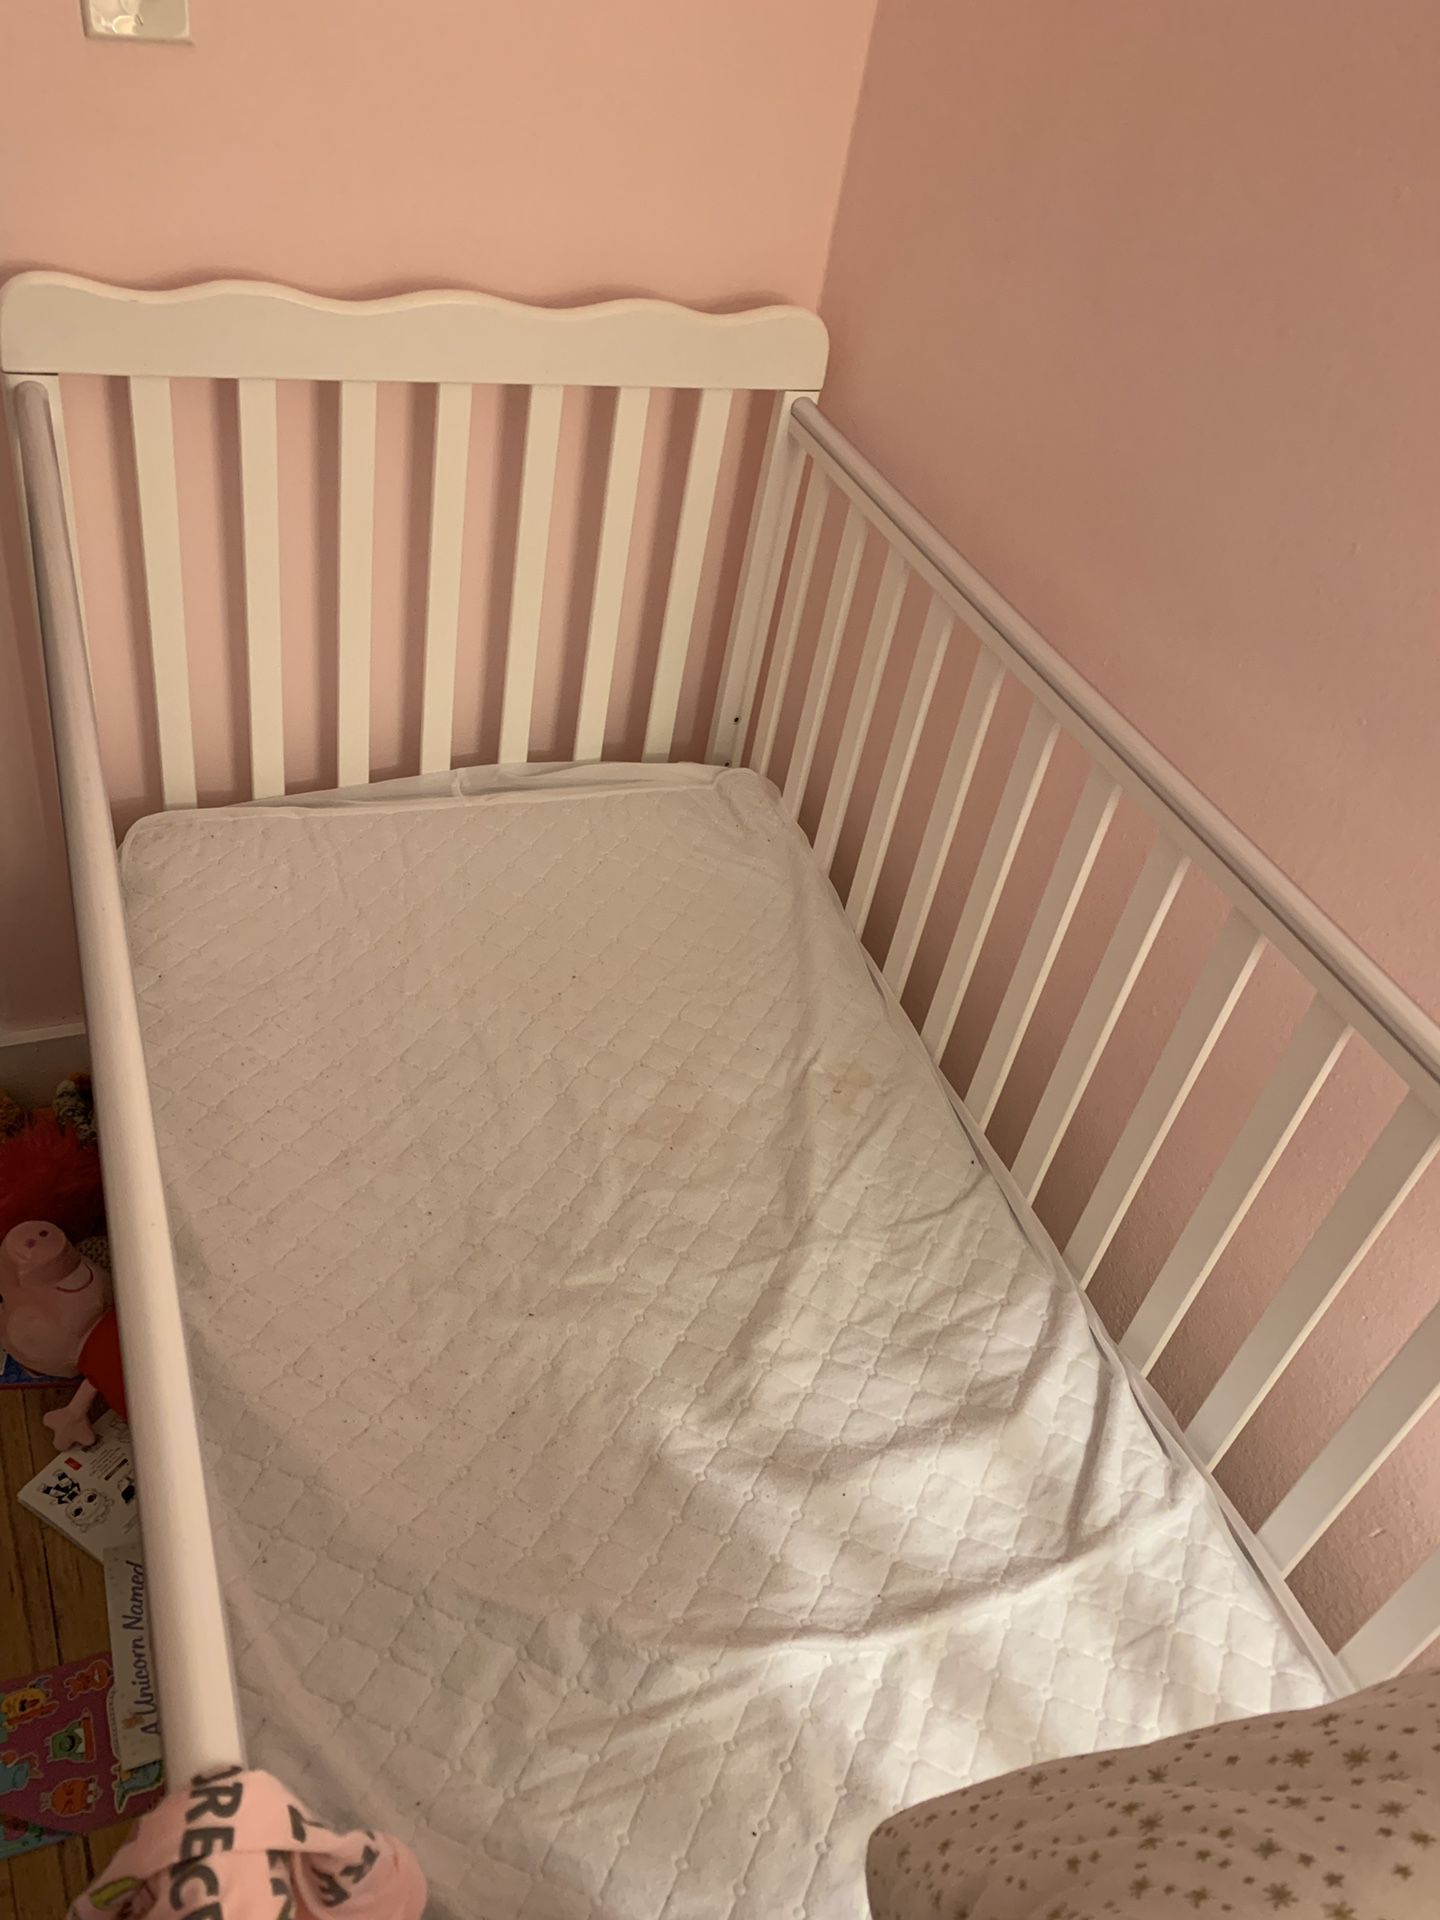 Baby crib (mattress included)